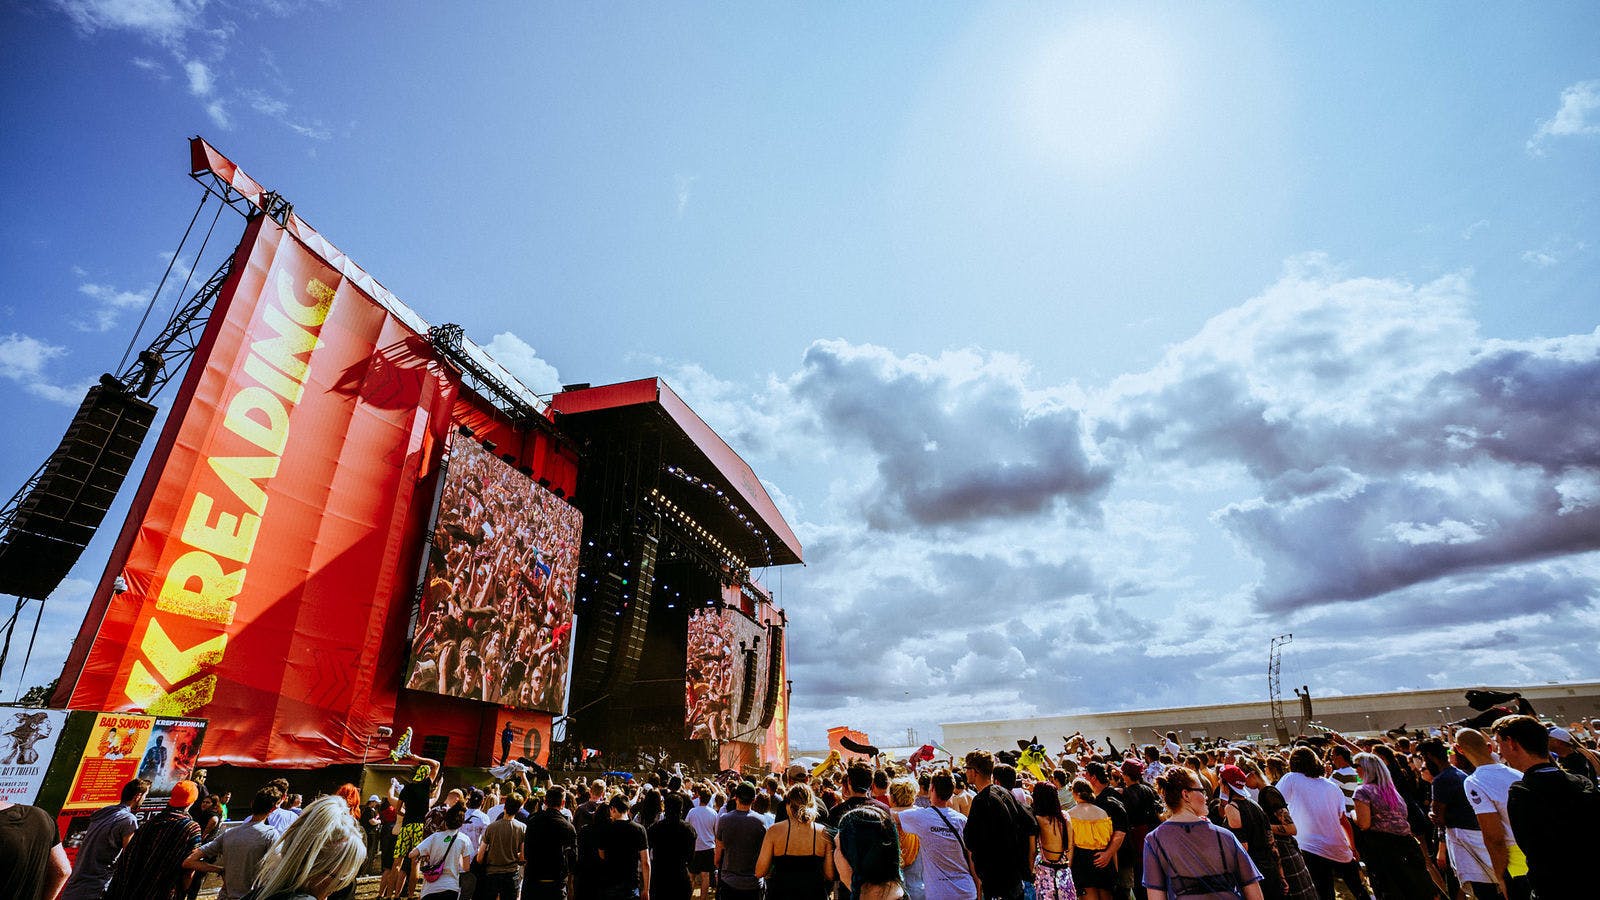 Reading councillor says "nothing has been agreed" regarding August 2021 festival